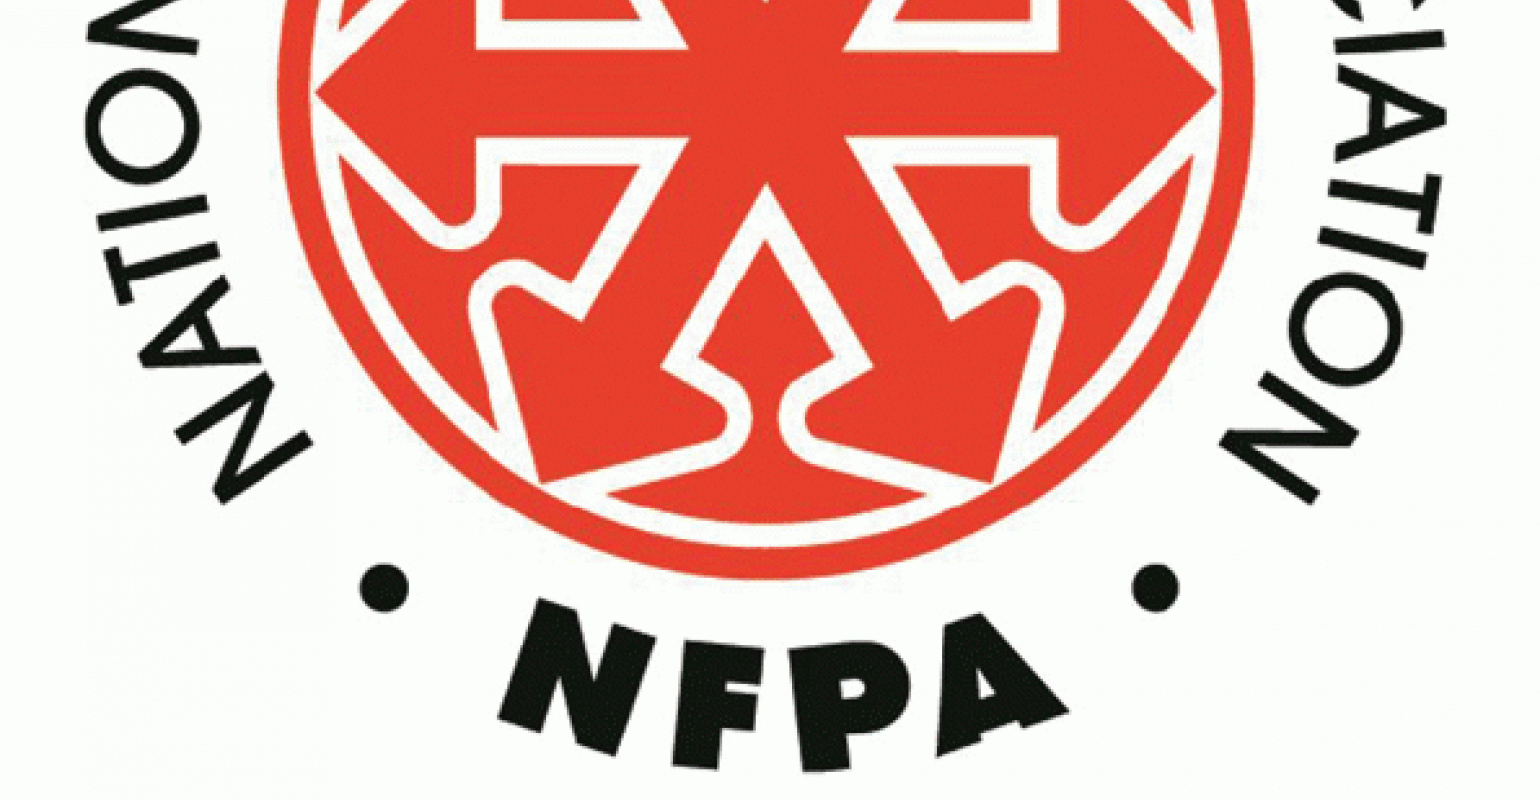 NFPA Logo - NFPA Releases Latest Figures For Fluid Power Product Shipments